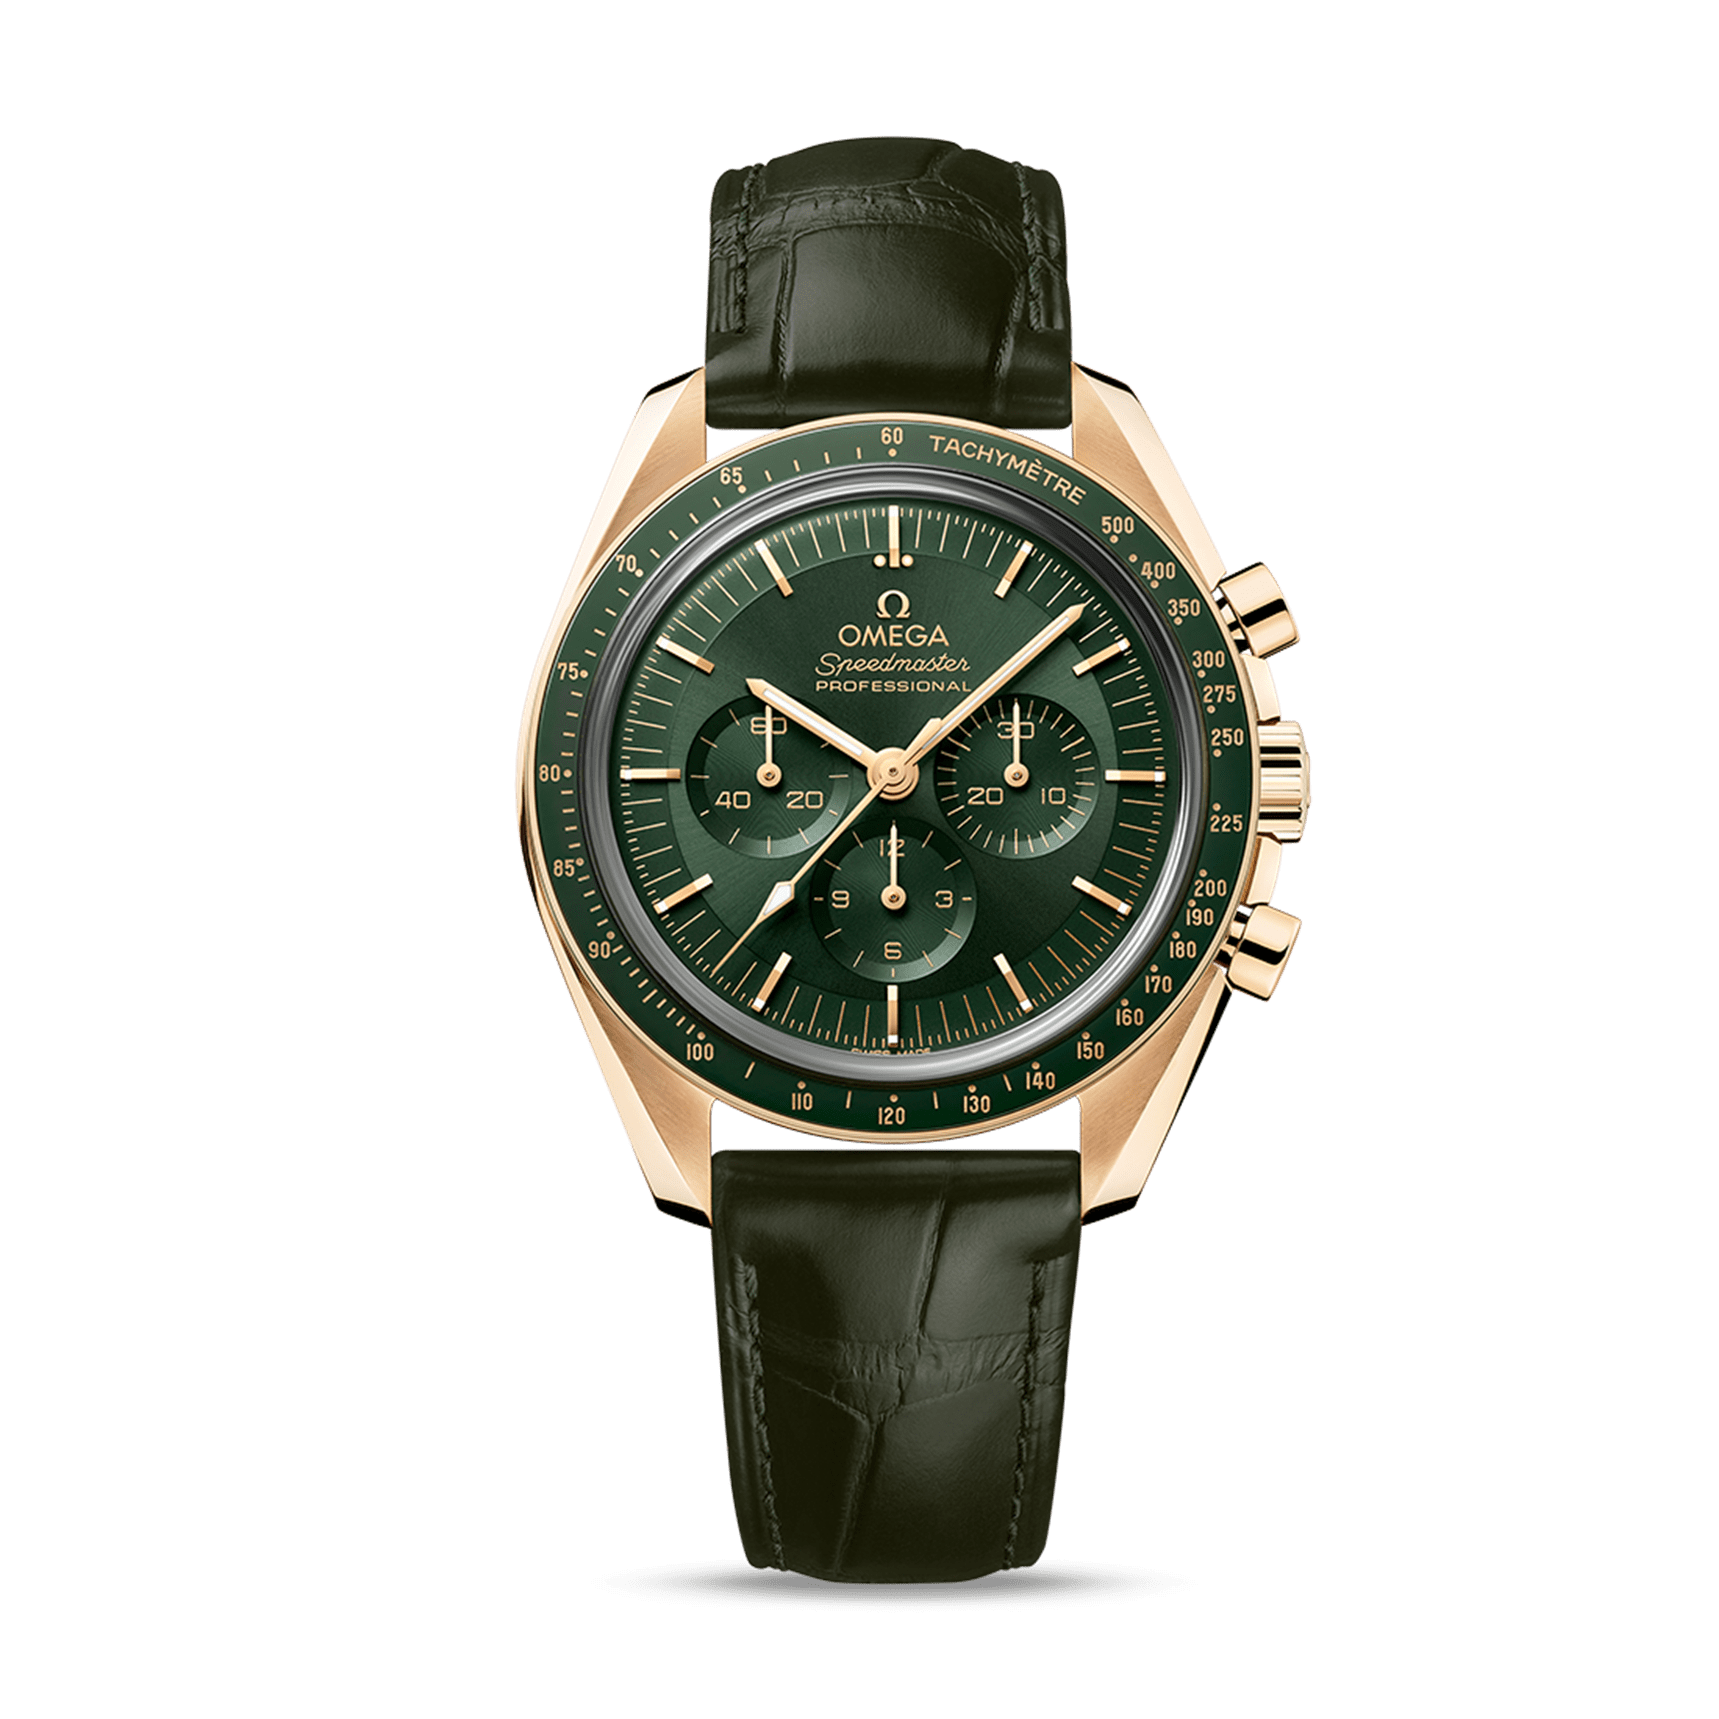 OMEGA Speedmaster Moonwatch Professional Co-Axial Master Chronometer Chronograph 42mm 310.63.42.31.10.001